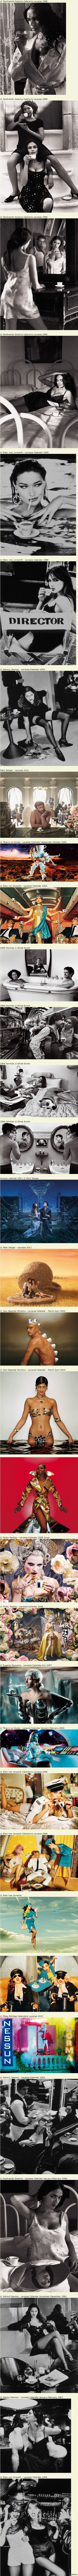 The Best of the Lavazza Coffee Calendar - Part 2 - NSFW, Lavazza, Coffee, The calendar, Longpost